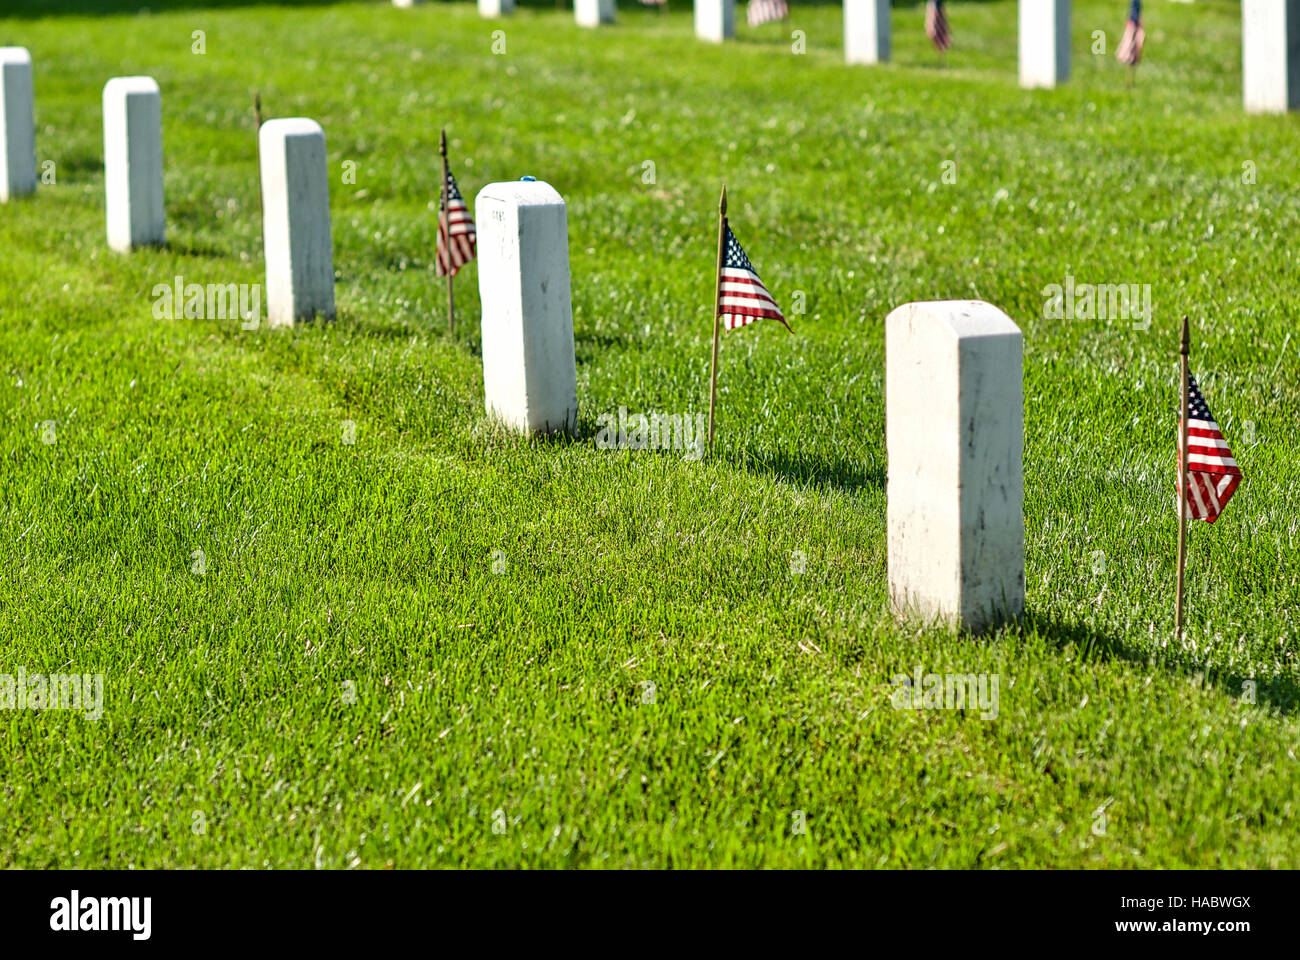 Fort Myer, Virginia, USA - May 1, 2015: American flags honor veterans buried at Arlington National Cemetery at Fort Myer near Washington, D.C. Stock Photo